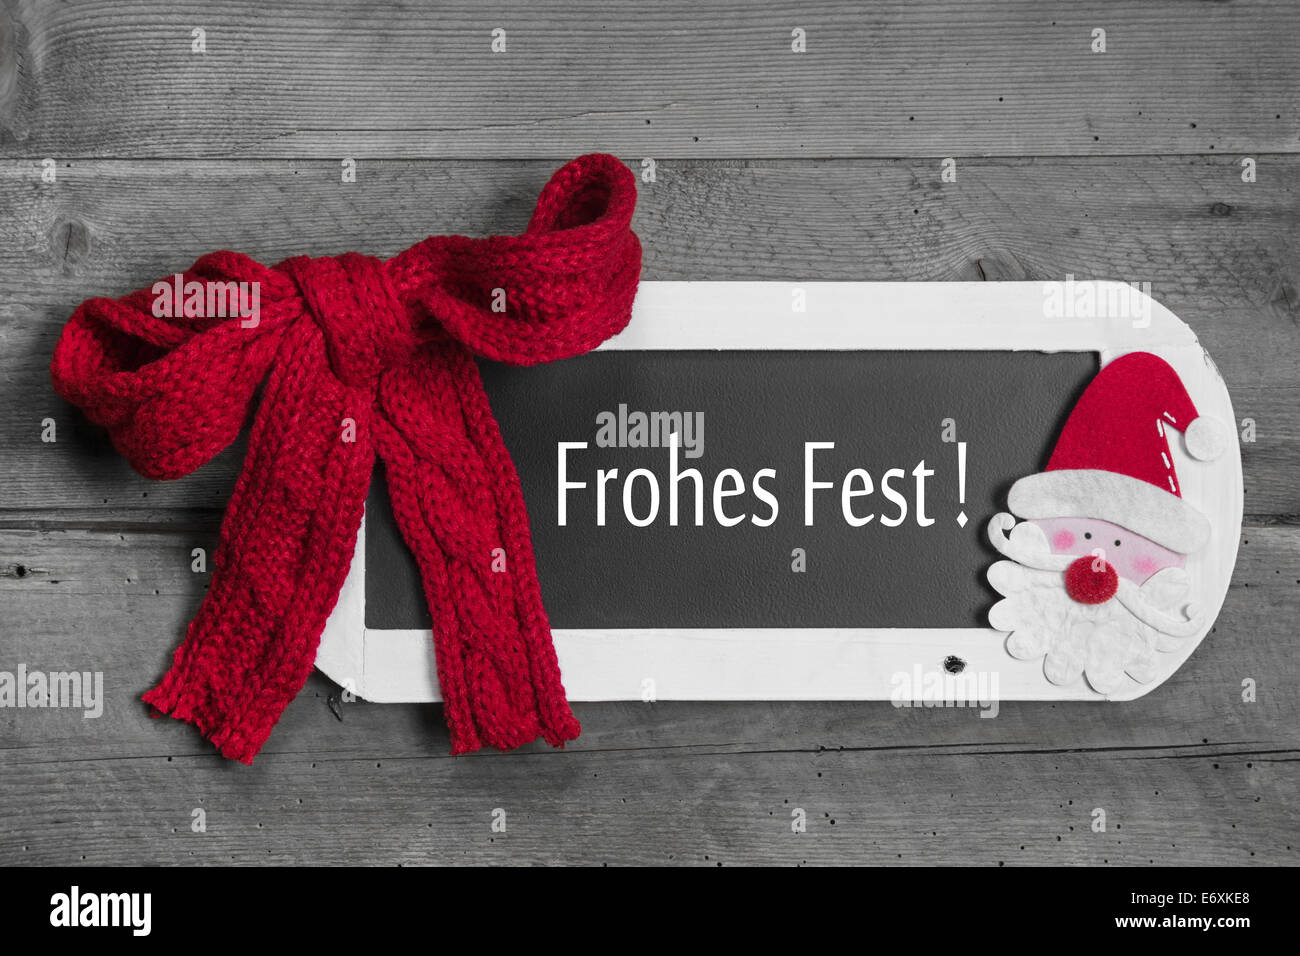 Red bow on menu board with Merry Christmas - Frohes Fest - german message on wooden background Stock Photo